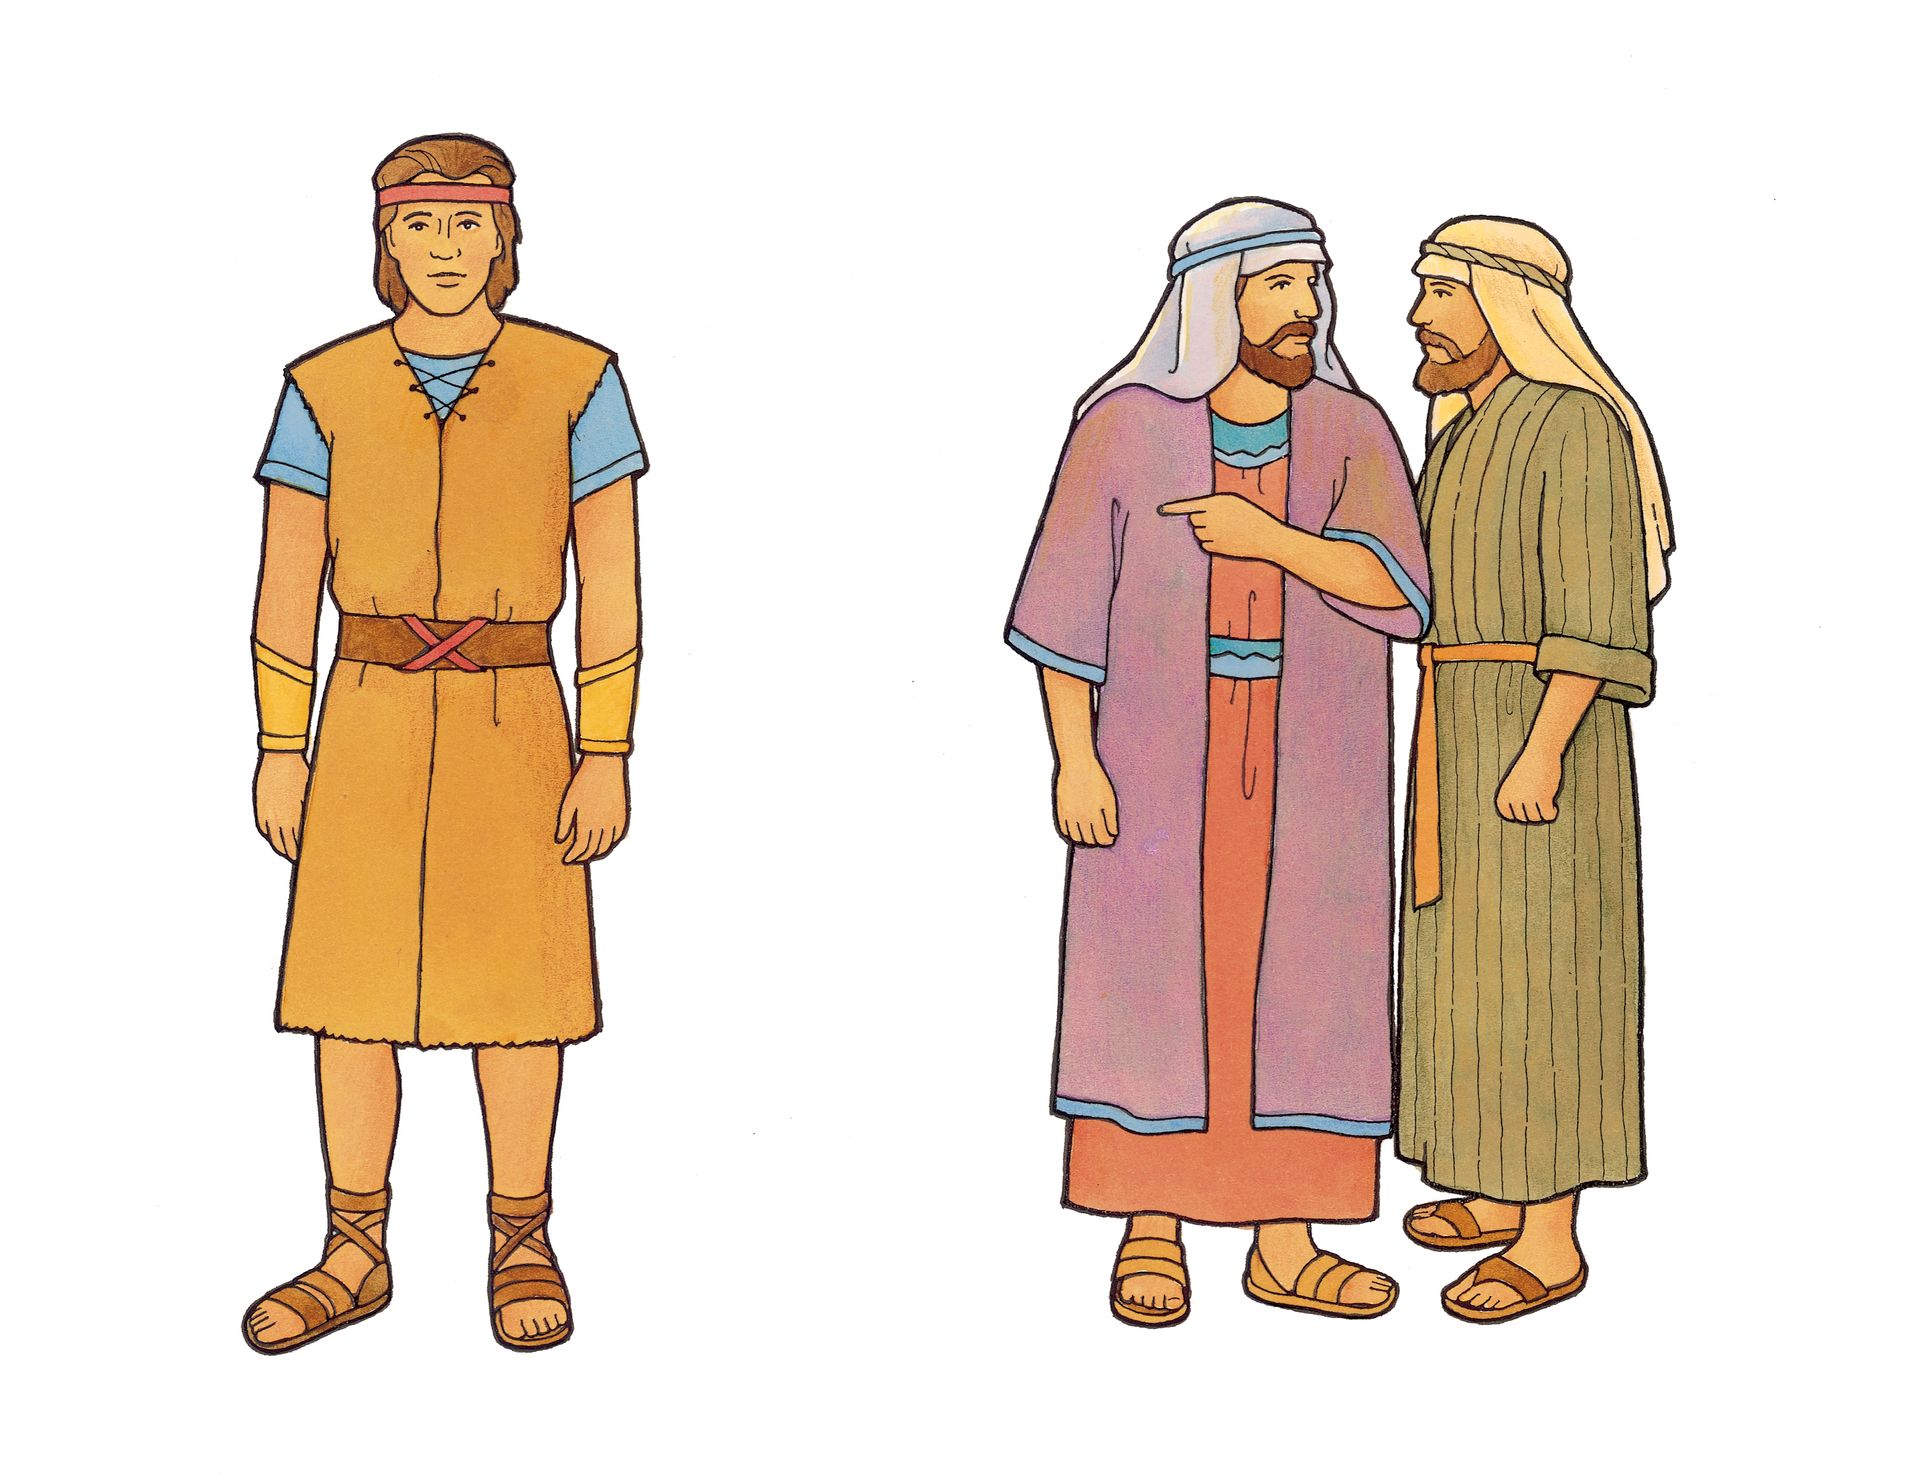 Laman and Lemuel whisper and point at their brother Nephi.